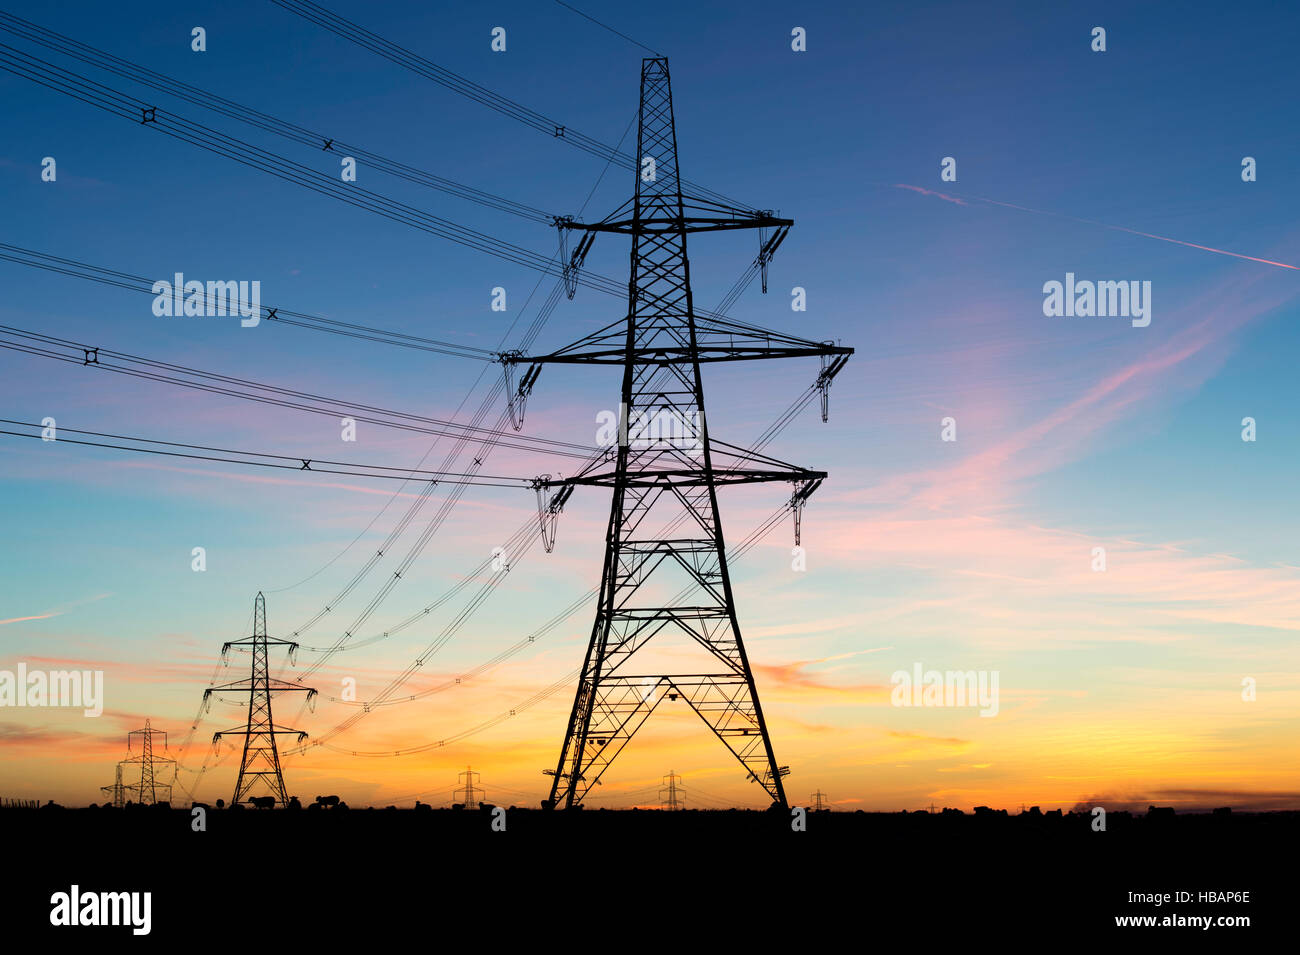 Electricity pylons silhouette against a dawn sky. UK Stock Photo